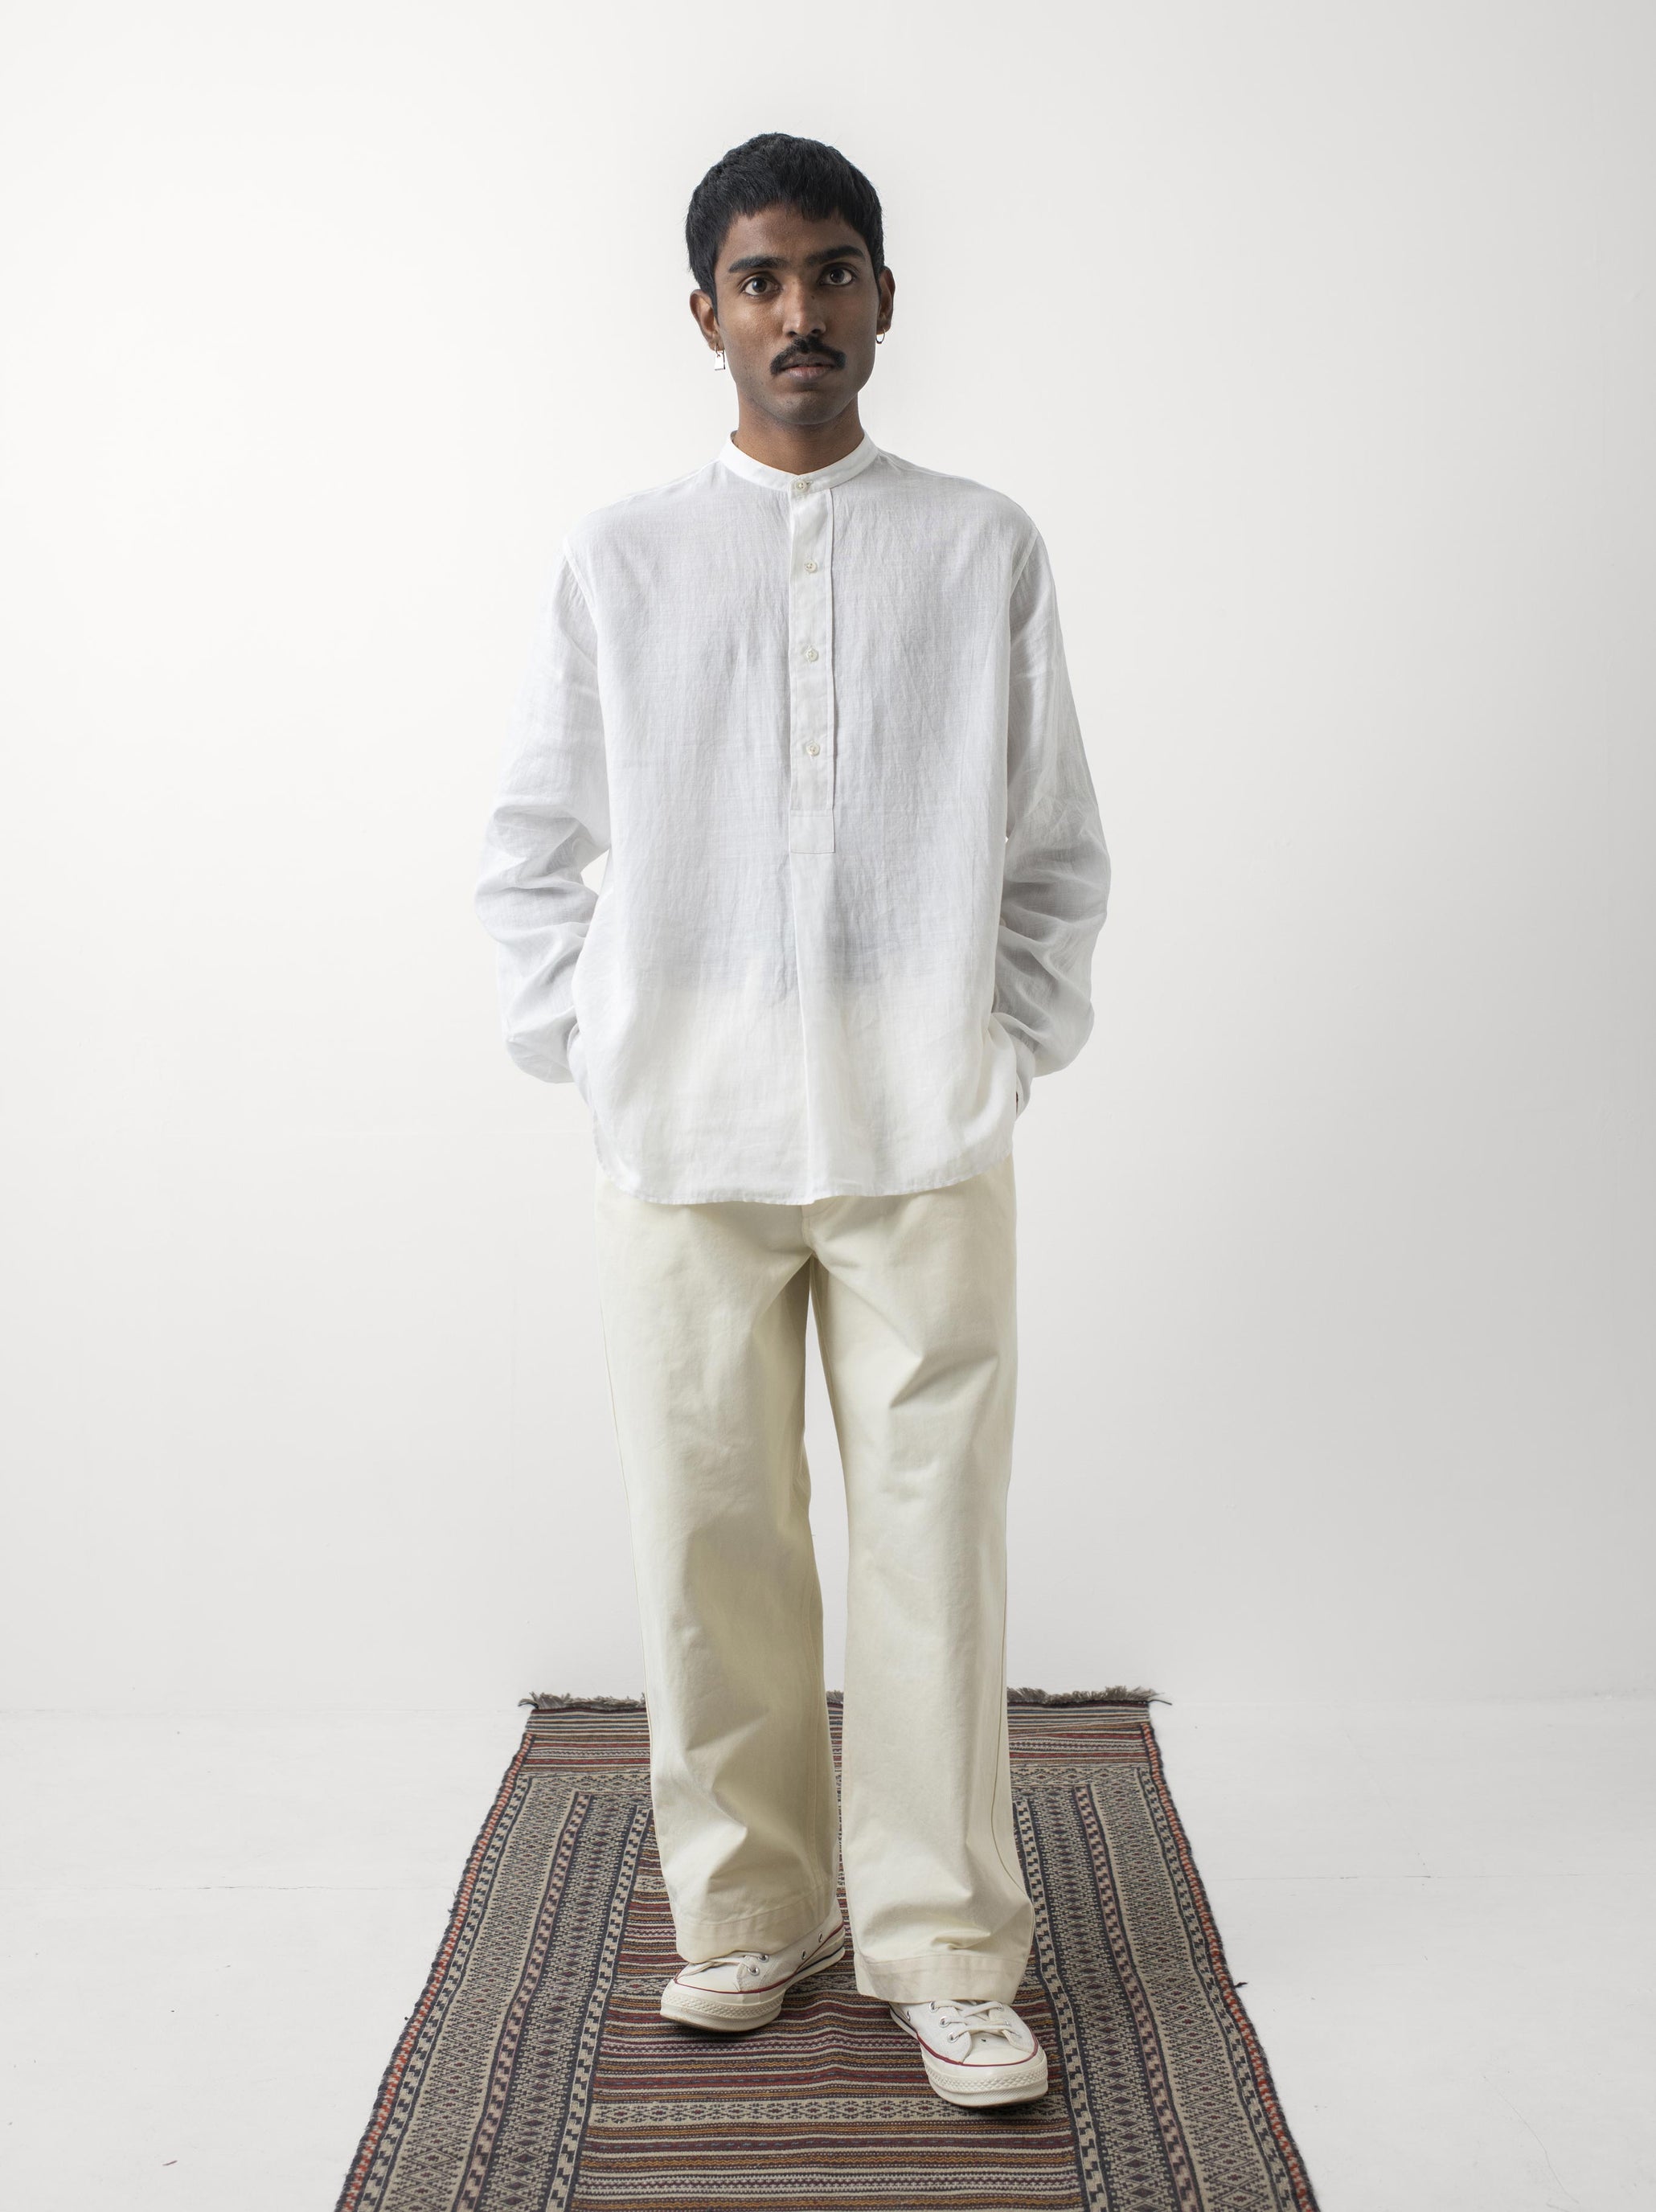 IT.EXC.22.06 FRONT PLACKET SHIRT